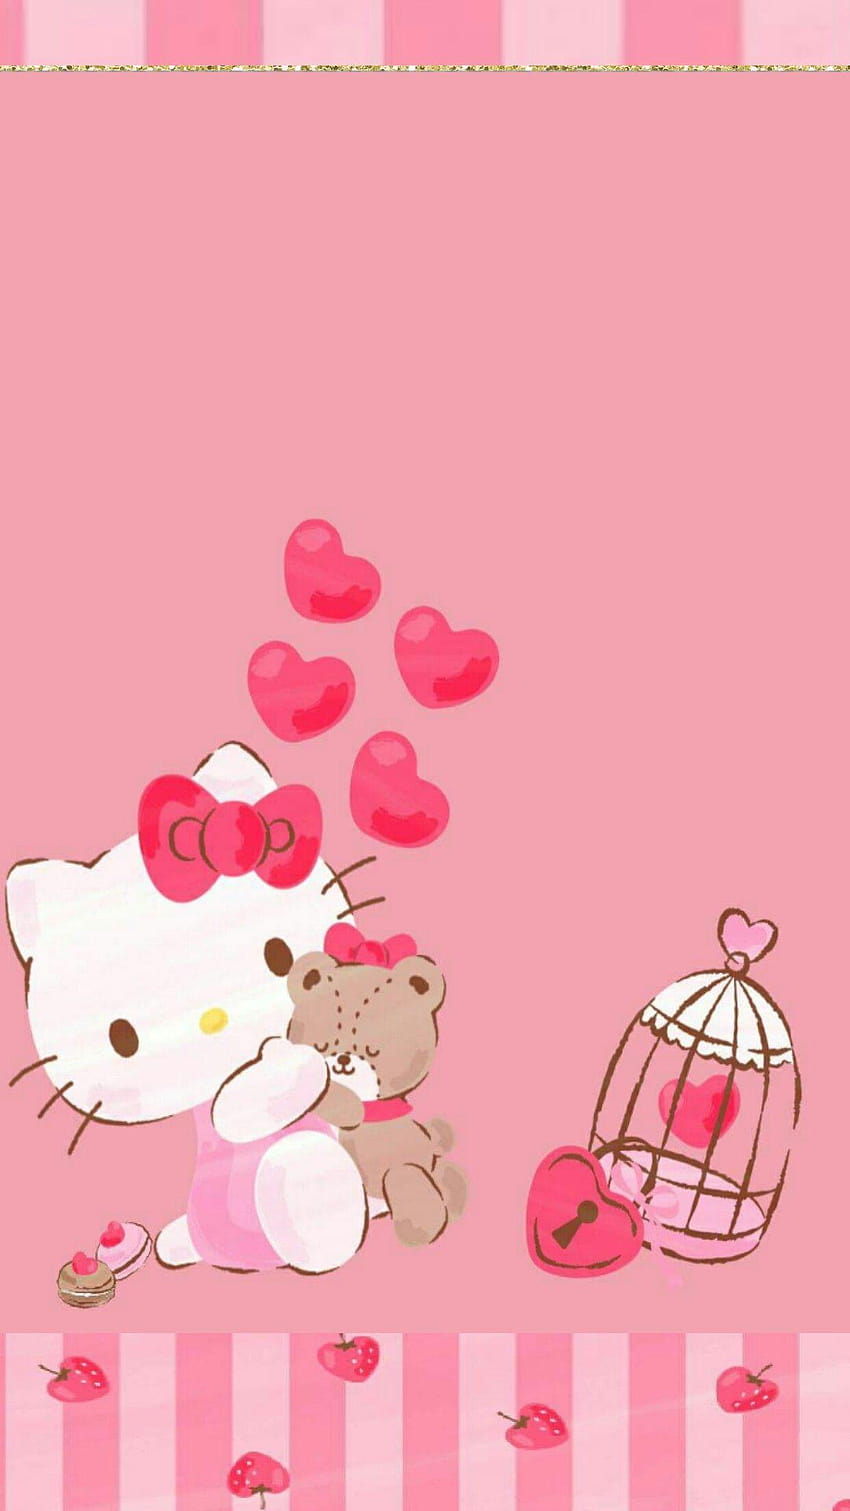 Cute Valentines Day Wallpaper  NawPic